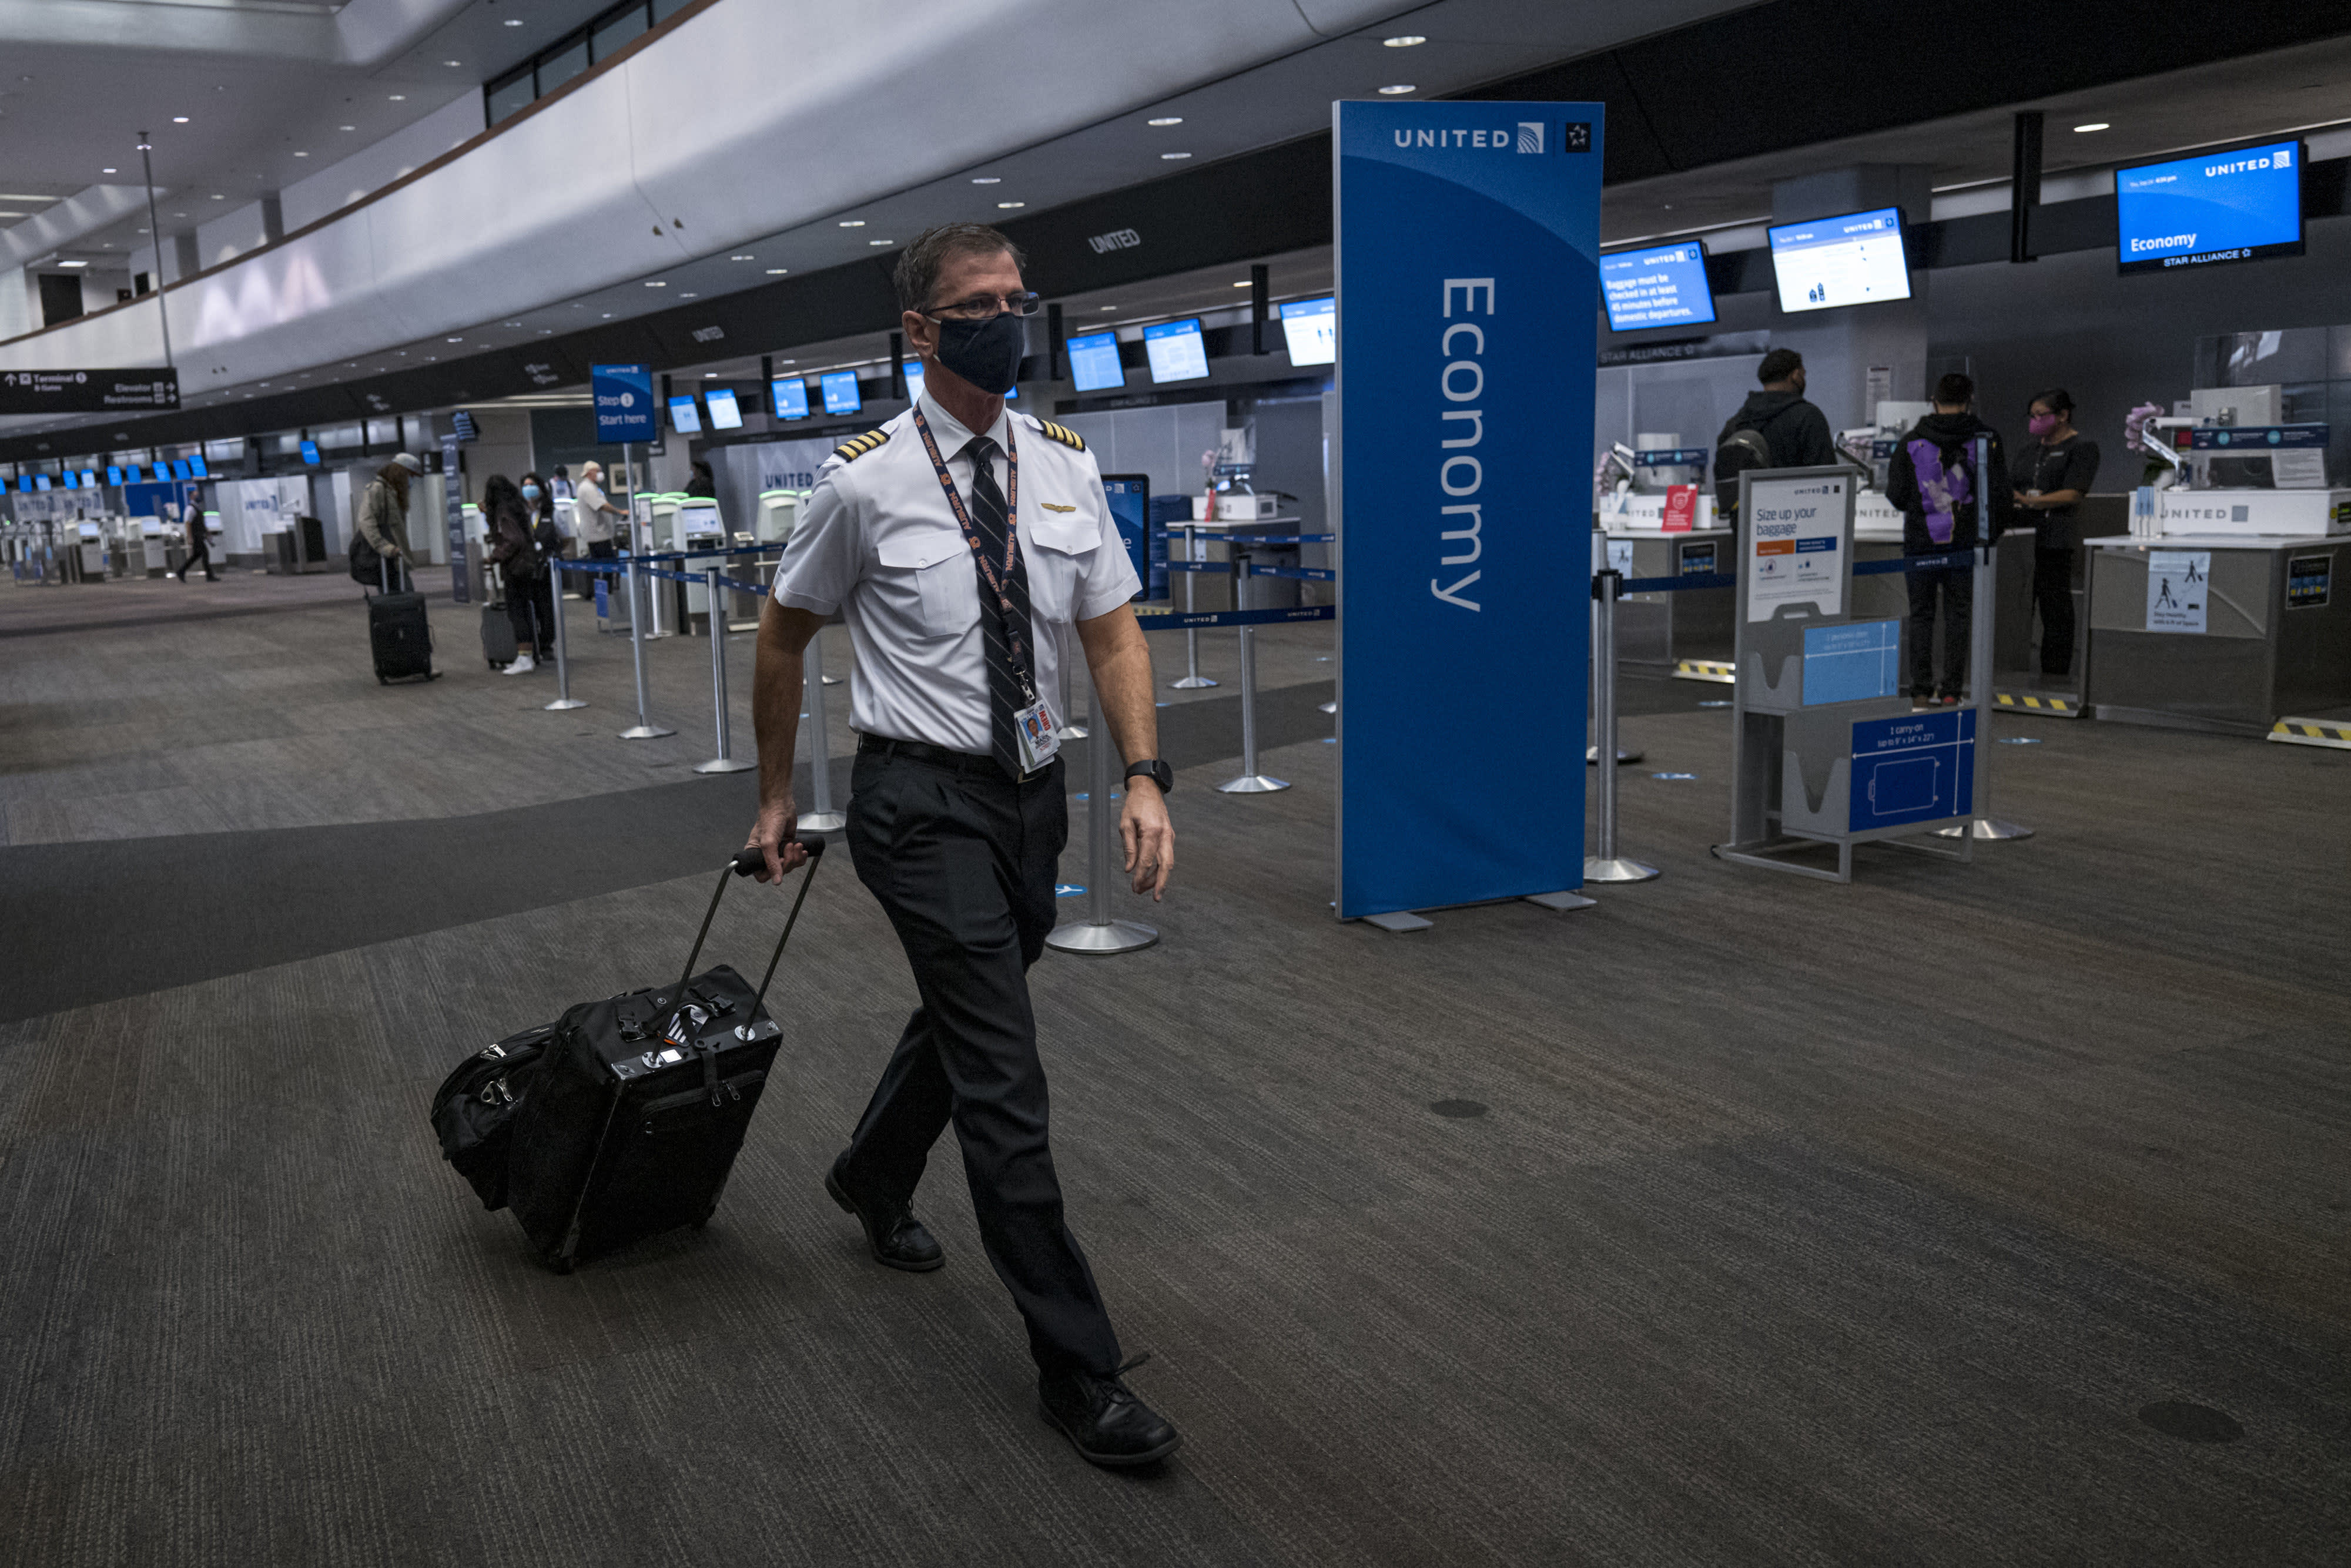 As the demand for flights recovers, airlines are reviving the hiring of pilots